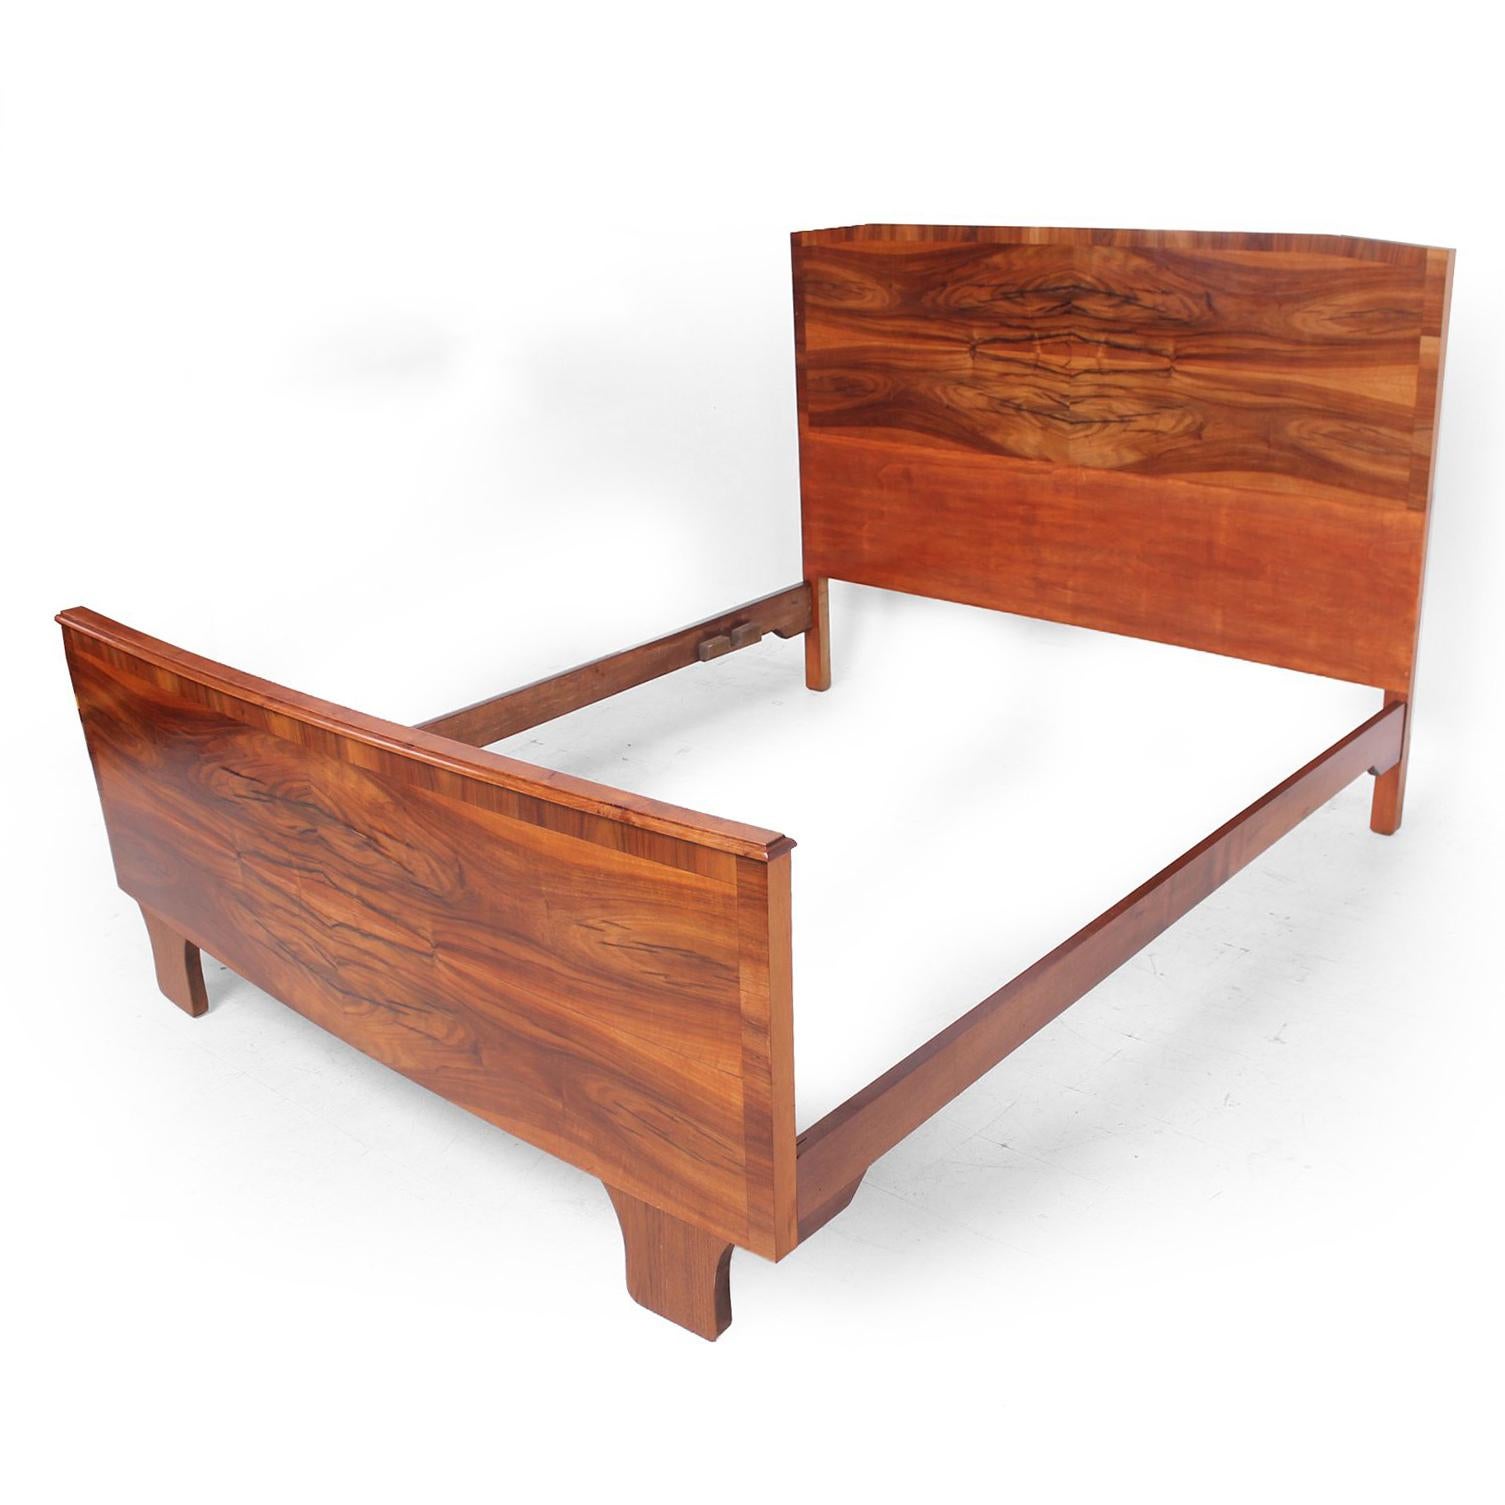 For your consideration a Italian bed frame with exotic wood.

Unmarked, no information on the maker. 

Beautiful design with oversize sculptural legs (foot board) Book matched exotic veneer. 

Overall dimensions:
Headboard 48